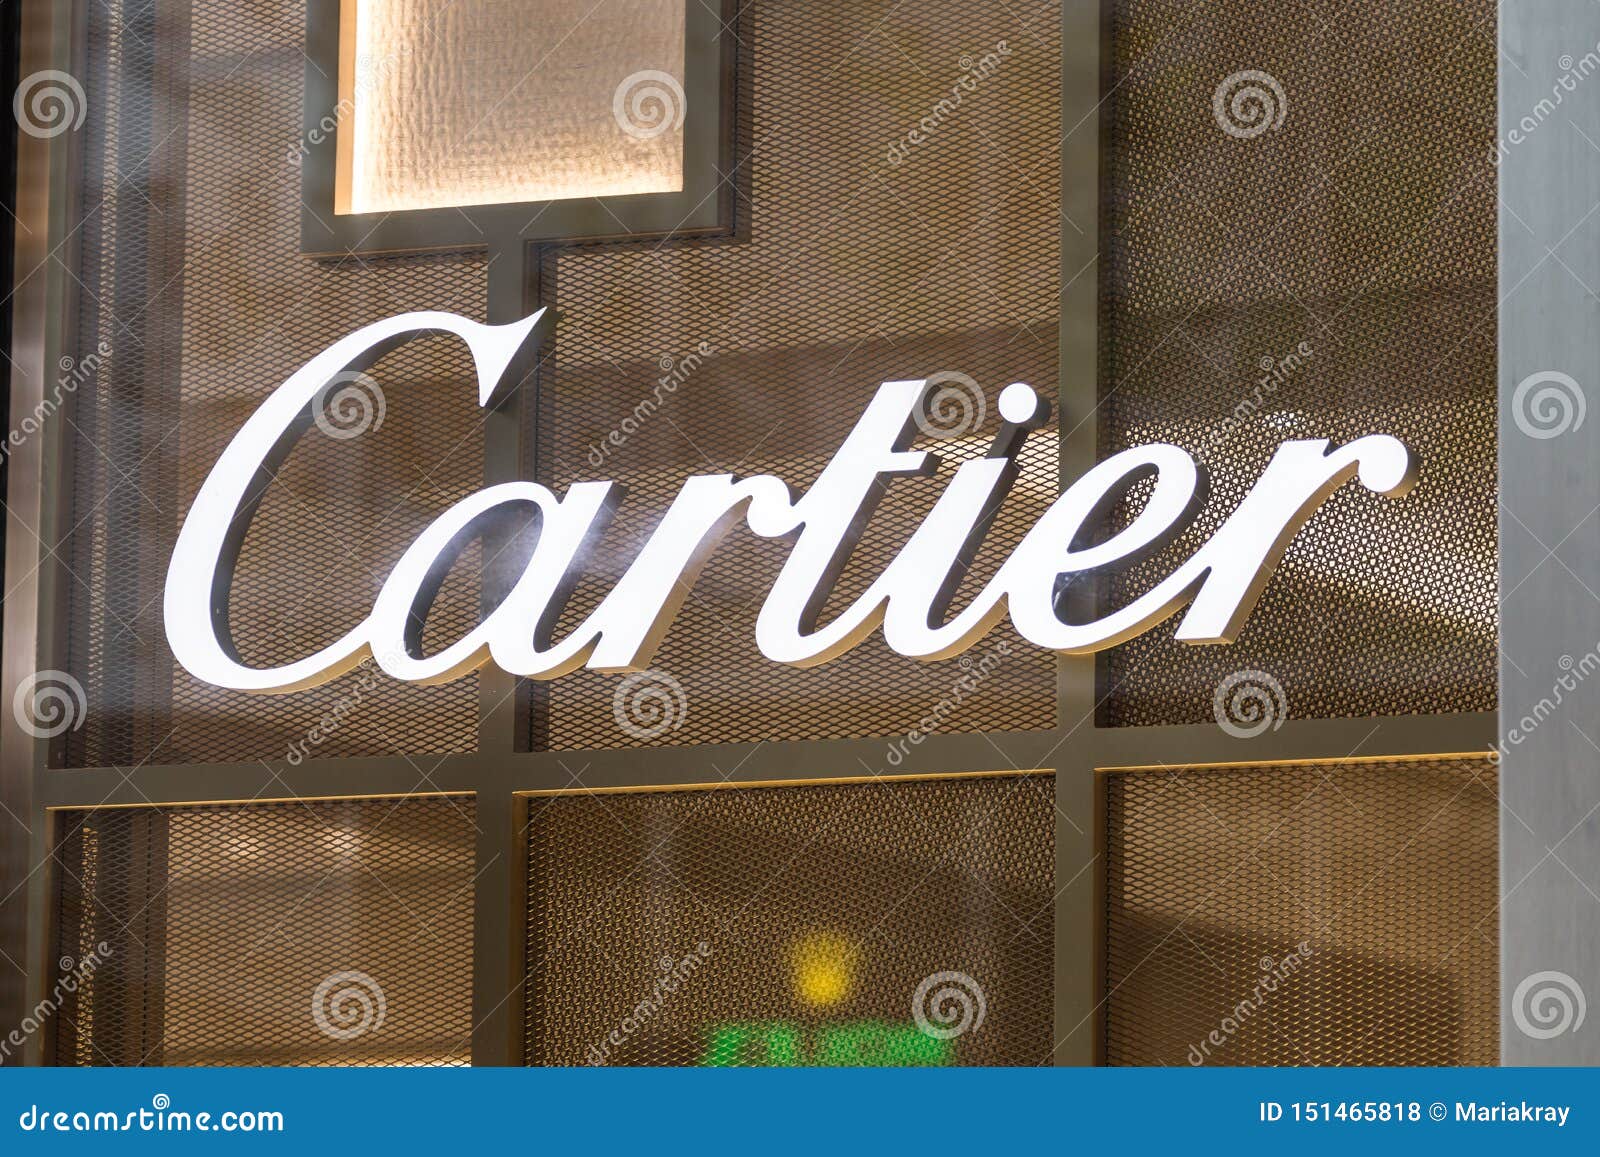 cartier jewelry france